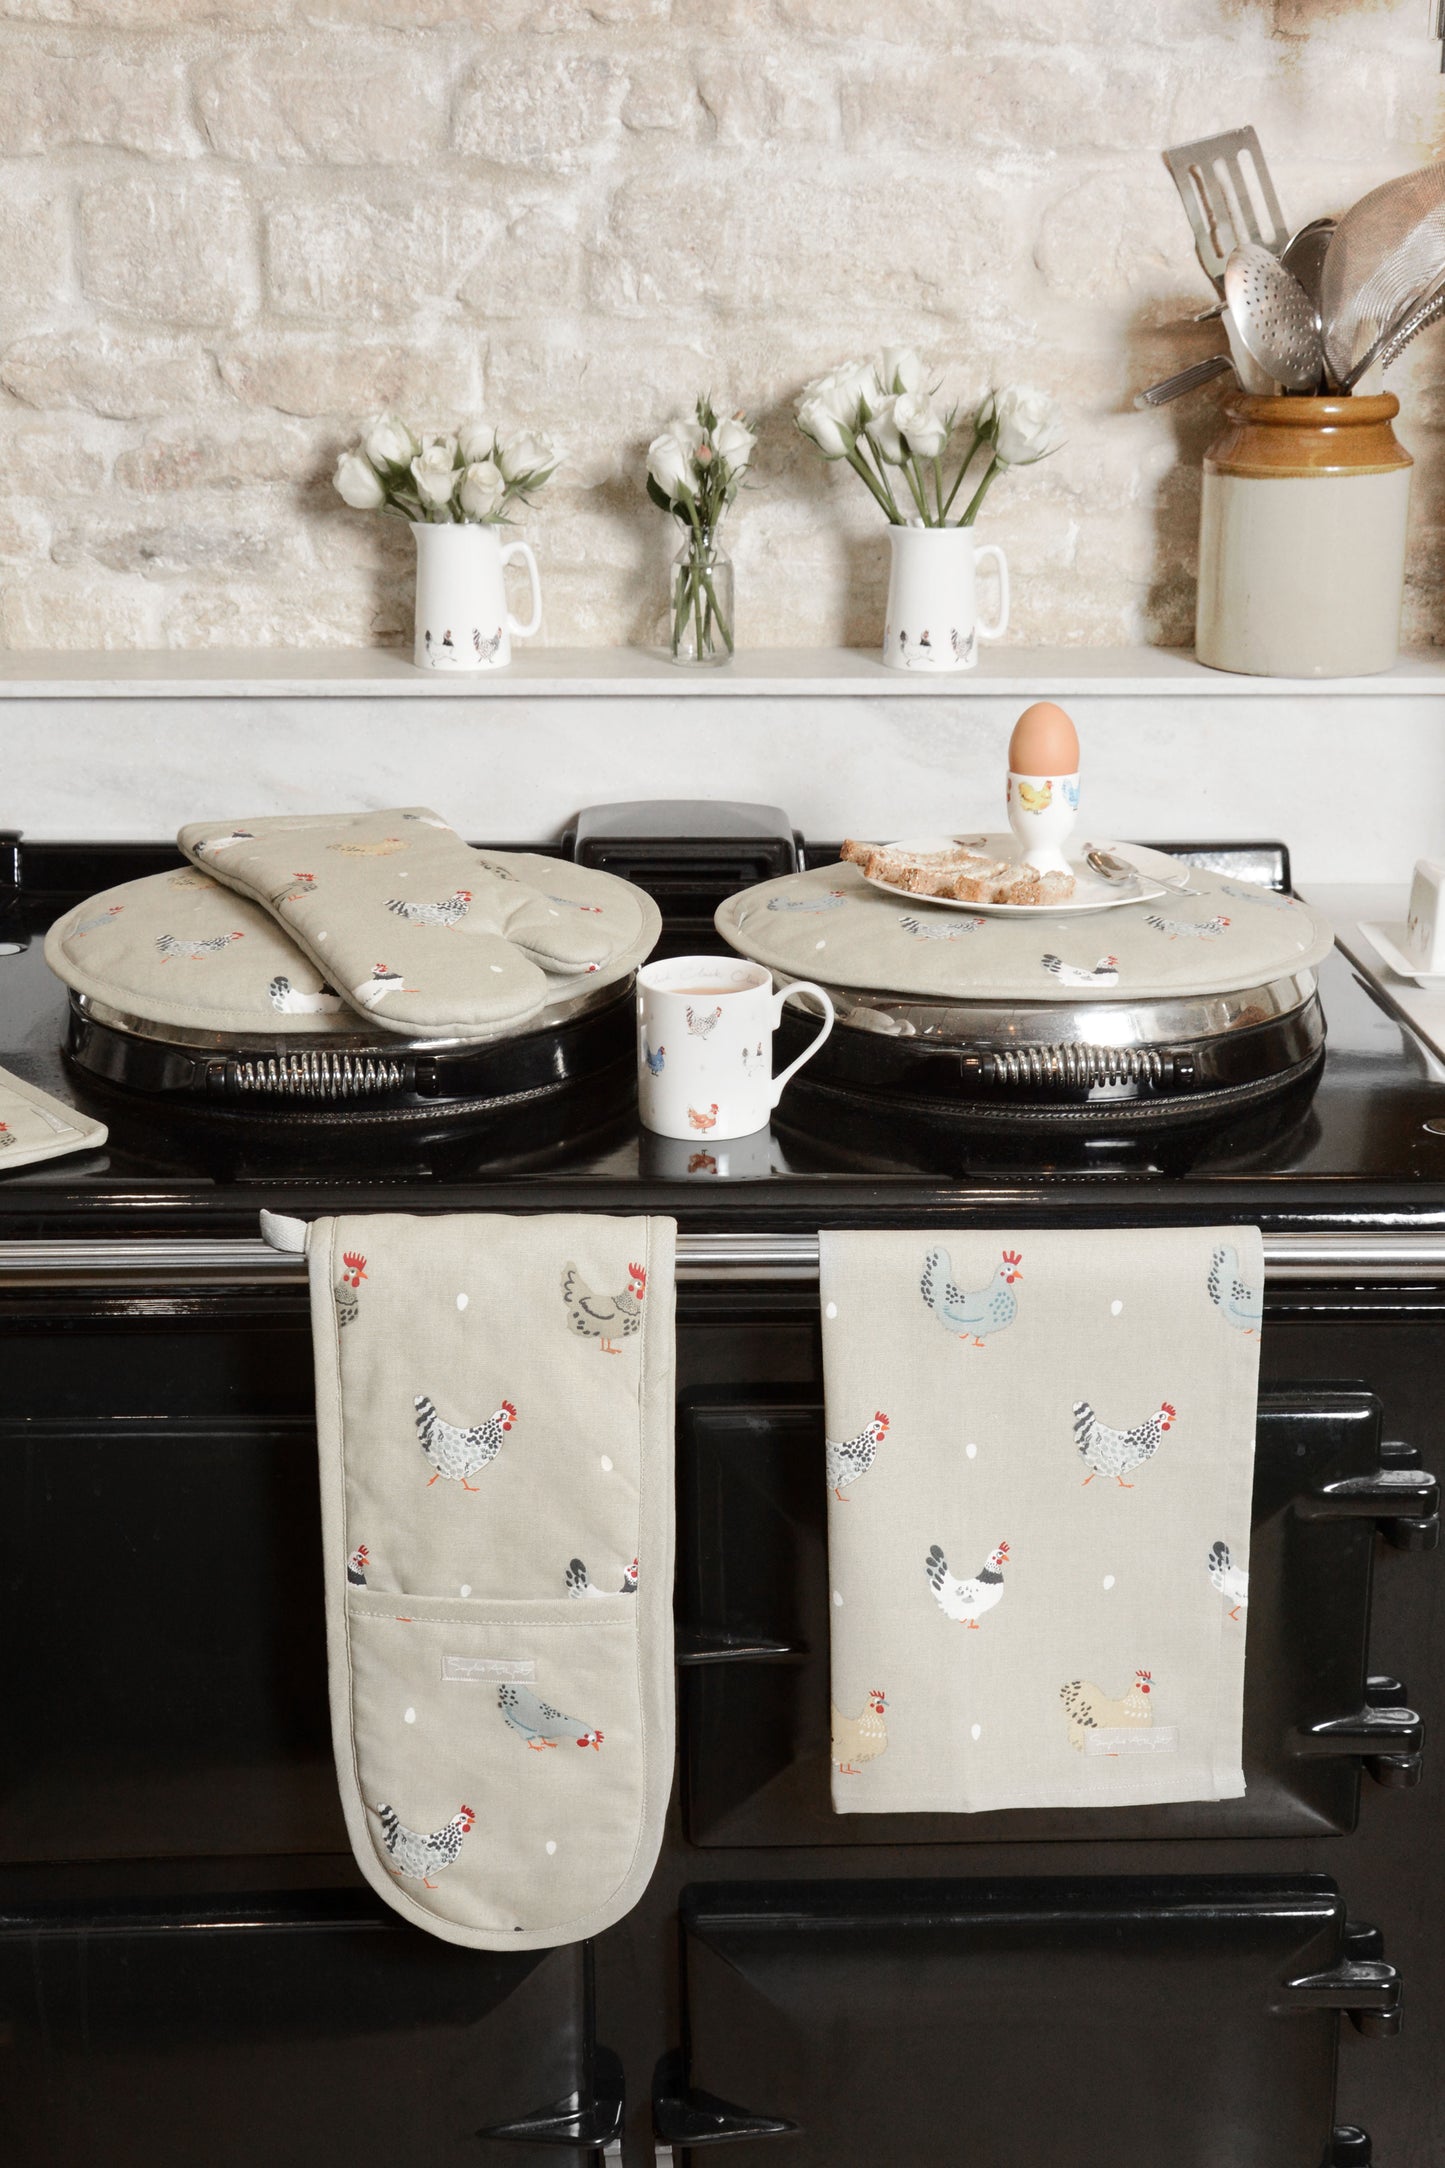 Sophie Allport "Lay a Little Egg" Chefs Pad For Use With Aga Range Cookers